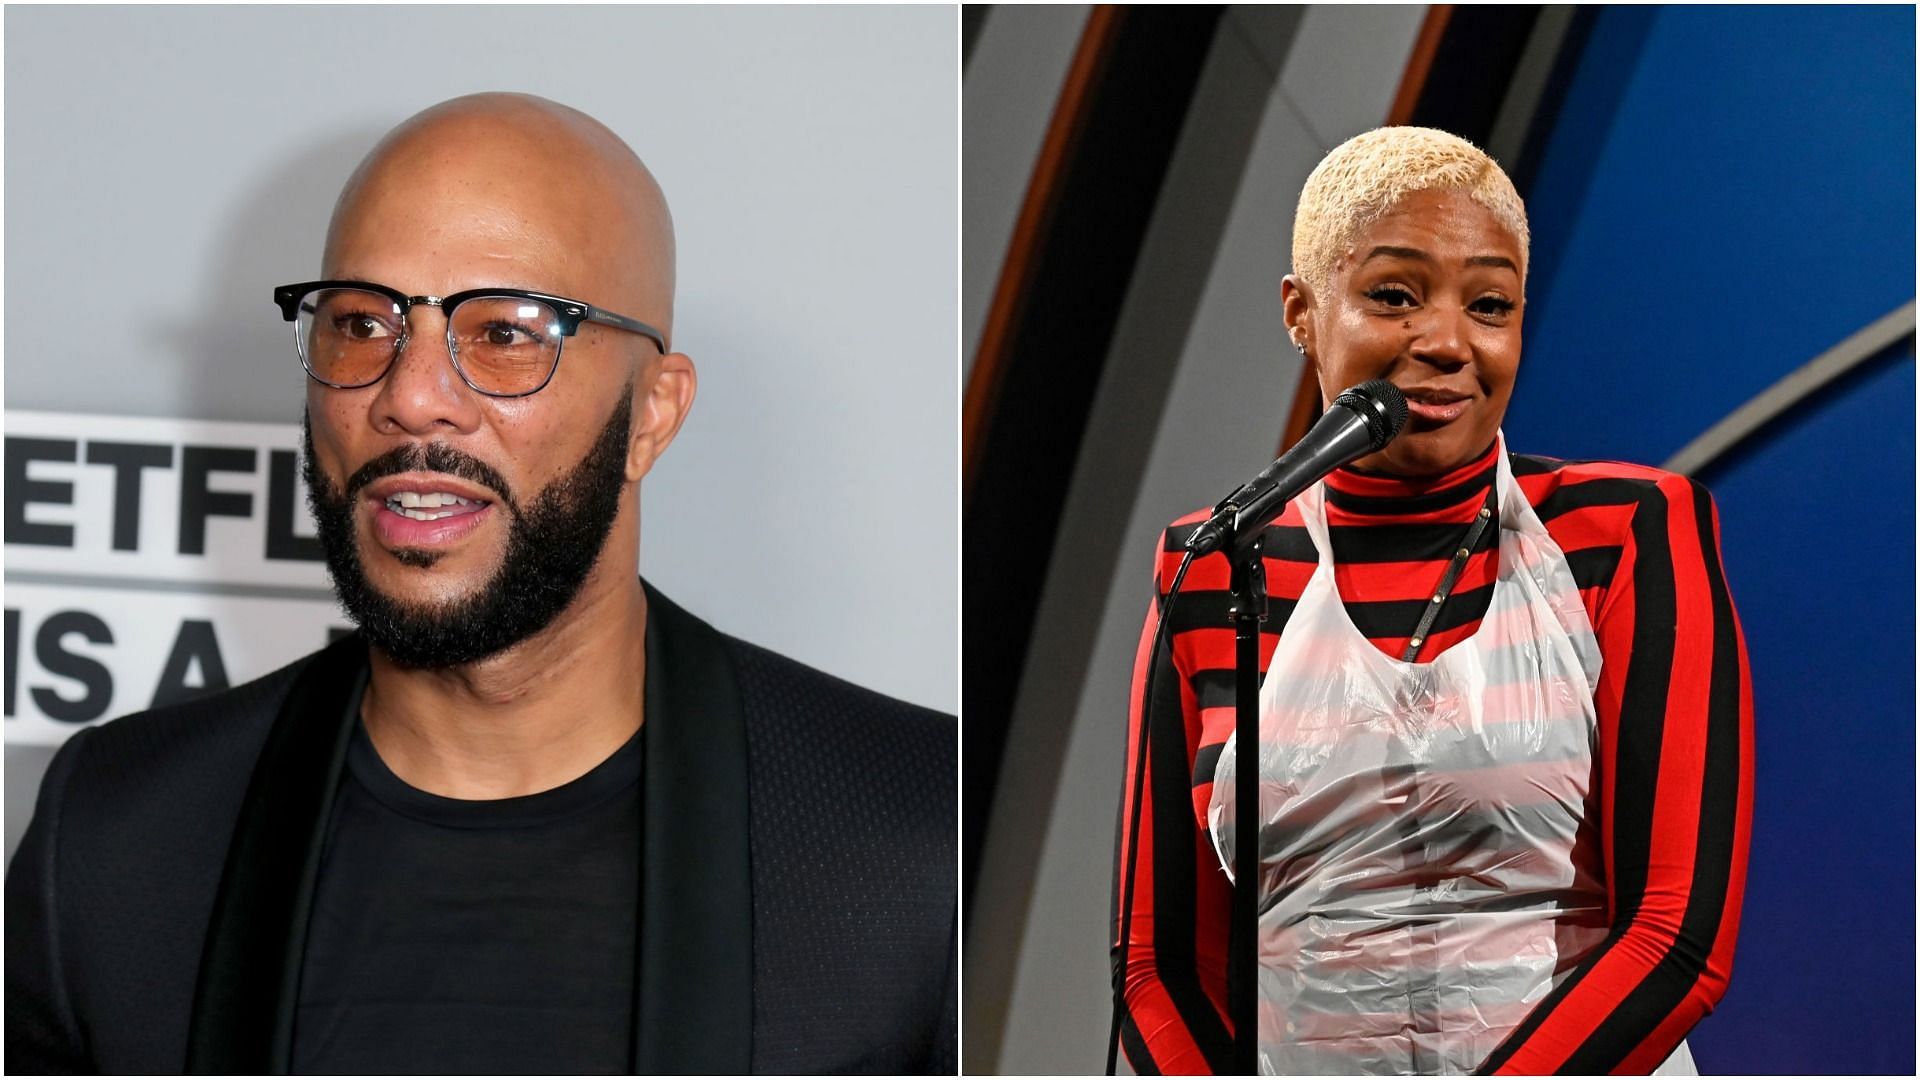 Common and Tiffany Haddish met for the first time in 2019 (Images by Leon Bennett and Michael Tullberg via Getty Images)